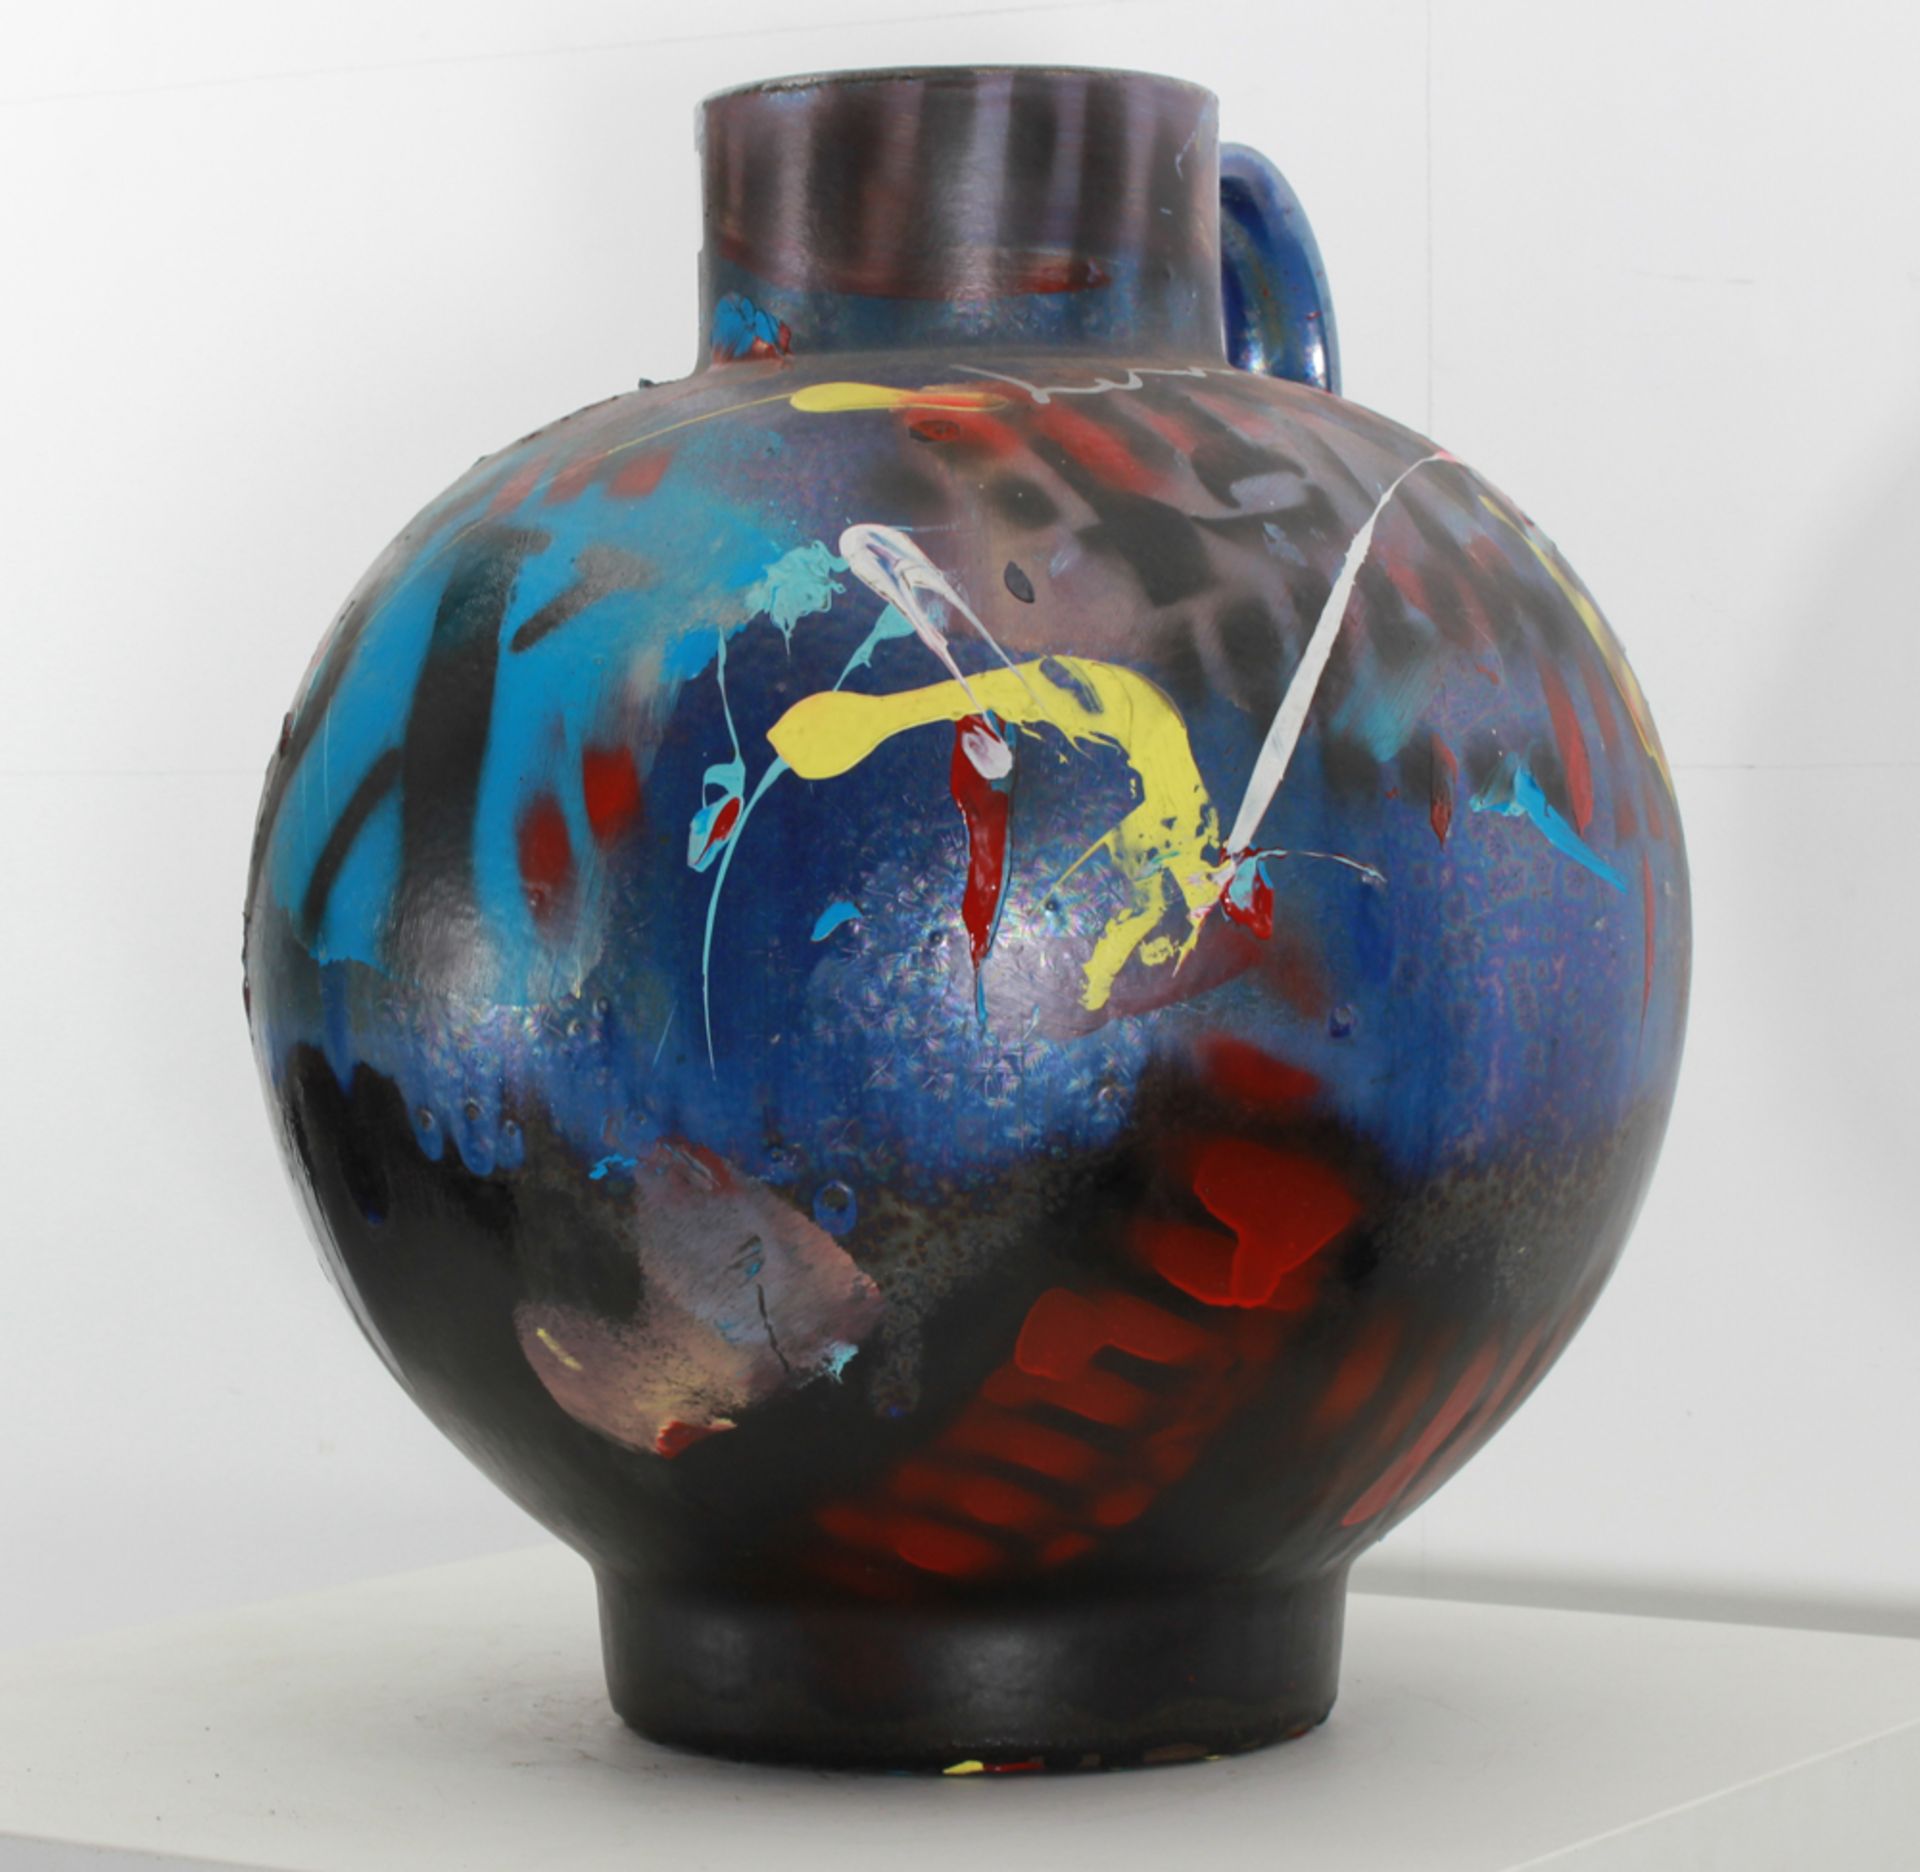 Herman Brood (1946 - 2001) Object from and get: Herman Brood, ** vase **, with certificate from Koos